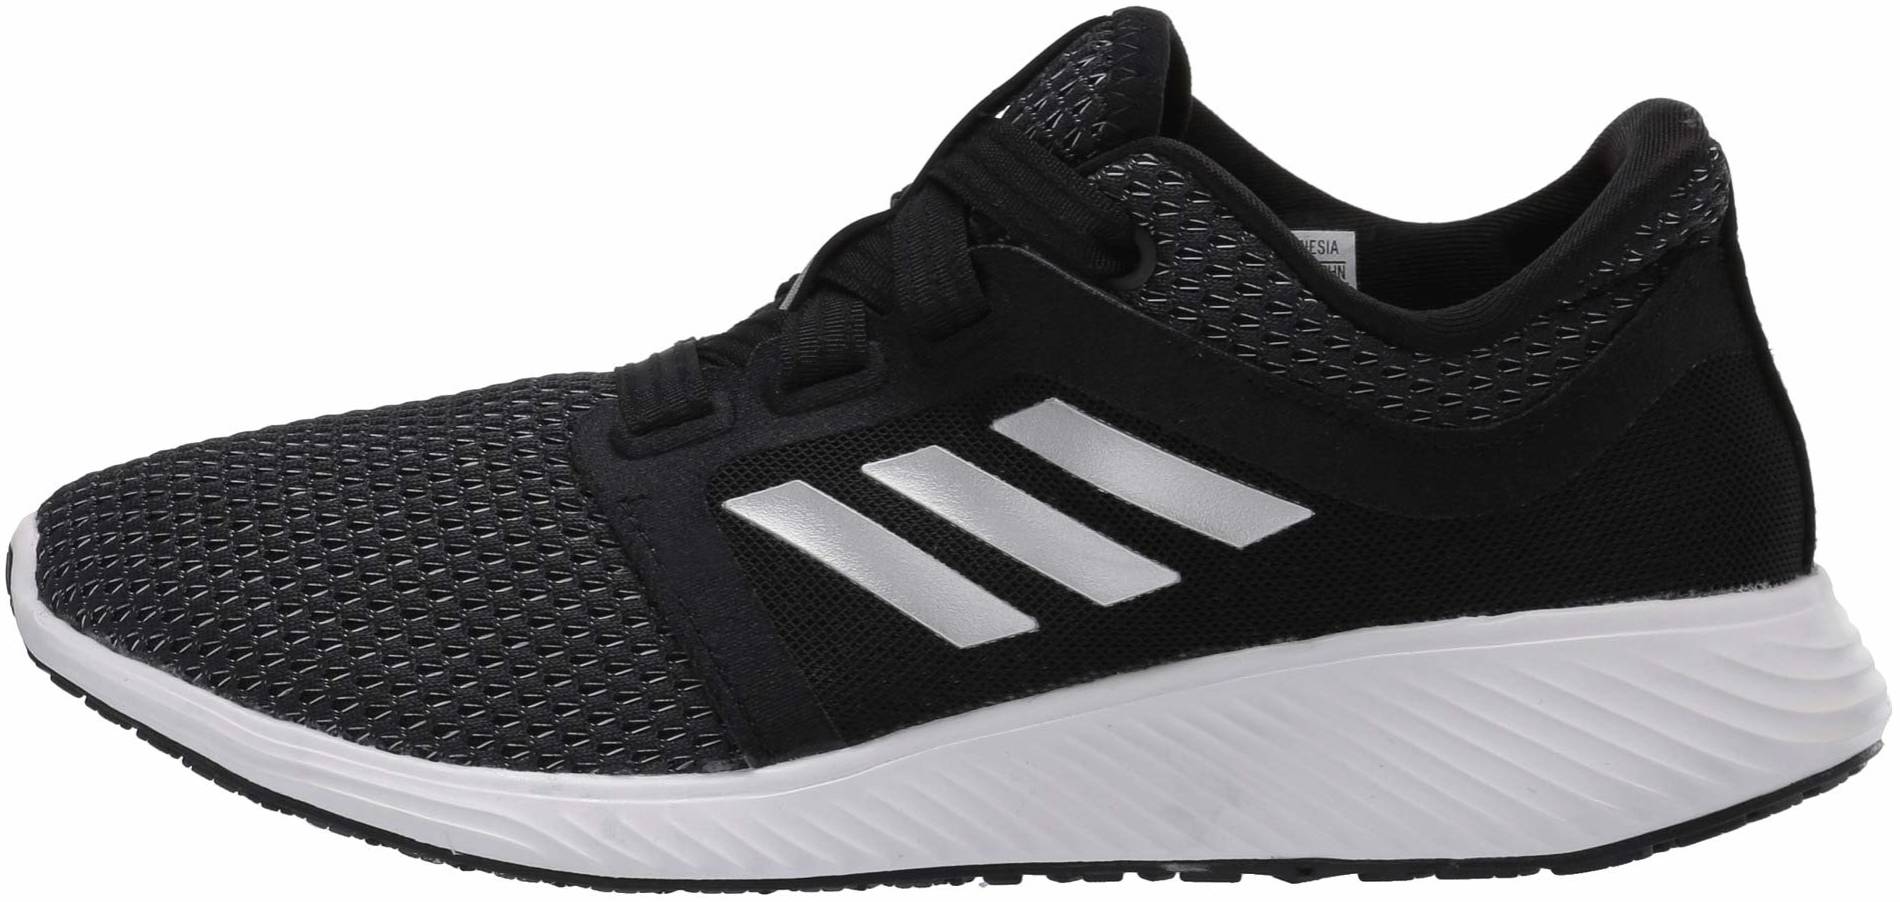 precoz familia real sarcoma adidas originals extaball womens sneakers sandals | Deals ($48), Facts,  CaribbeanpoultryShops, Adidas Edge Lux 3 Review 2022